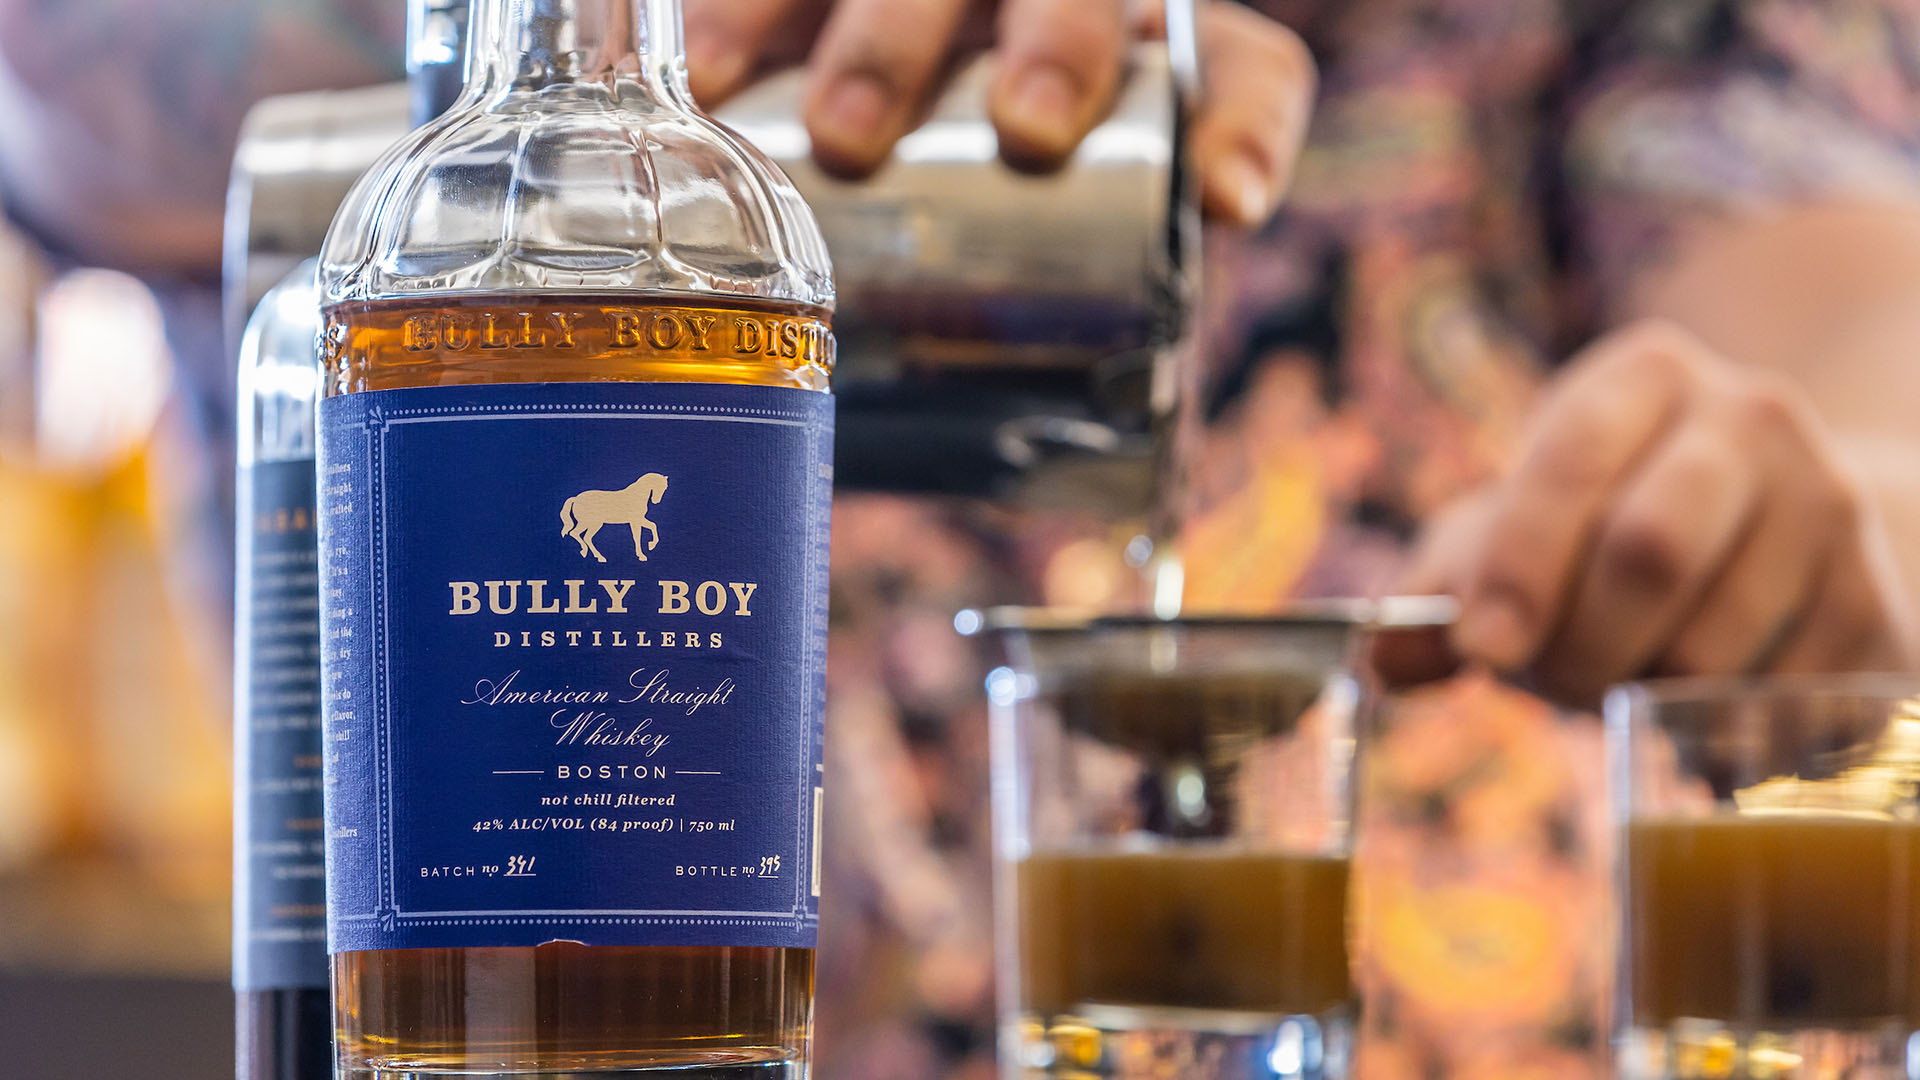 A bottle of Bully Boy whiskey in the foreground with a bartender pouring drinks through a strainer in the background